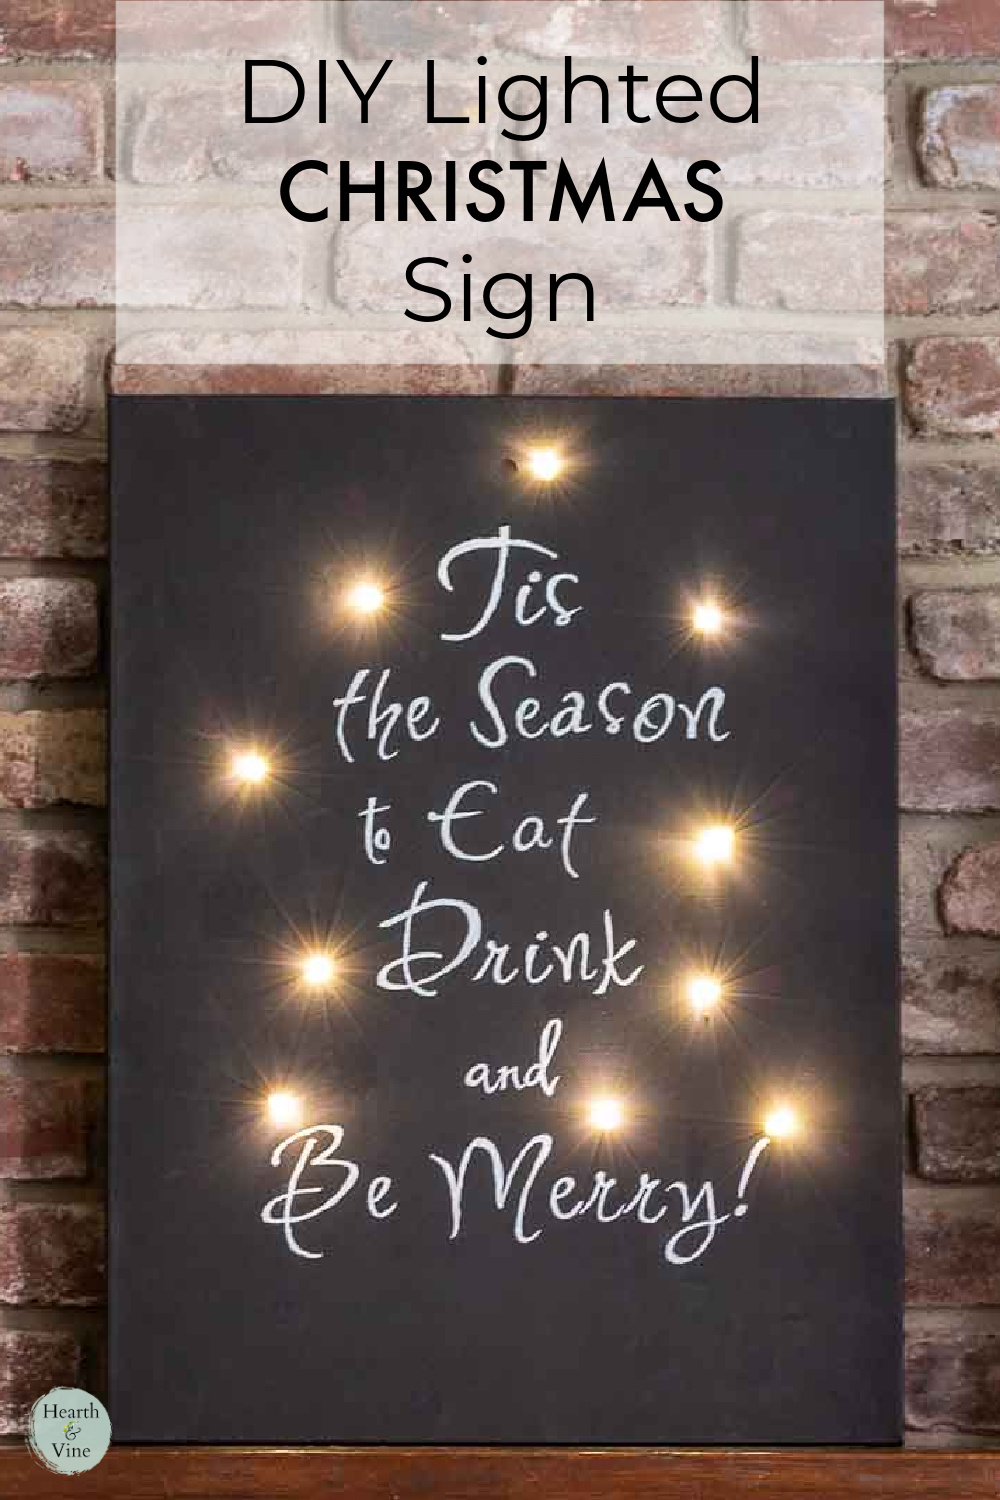 A black chalkboard look canvas with a white saying, "Tis the Season to Eat Drink and Be Merry" with LED lights around the edge.